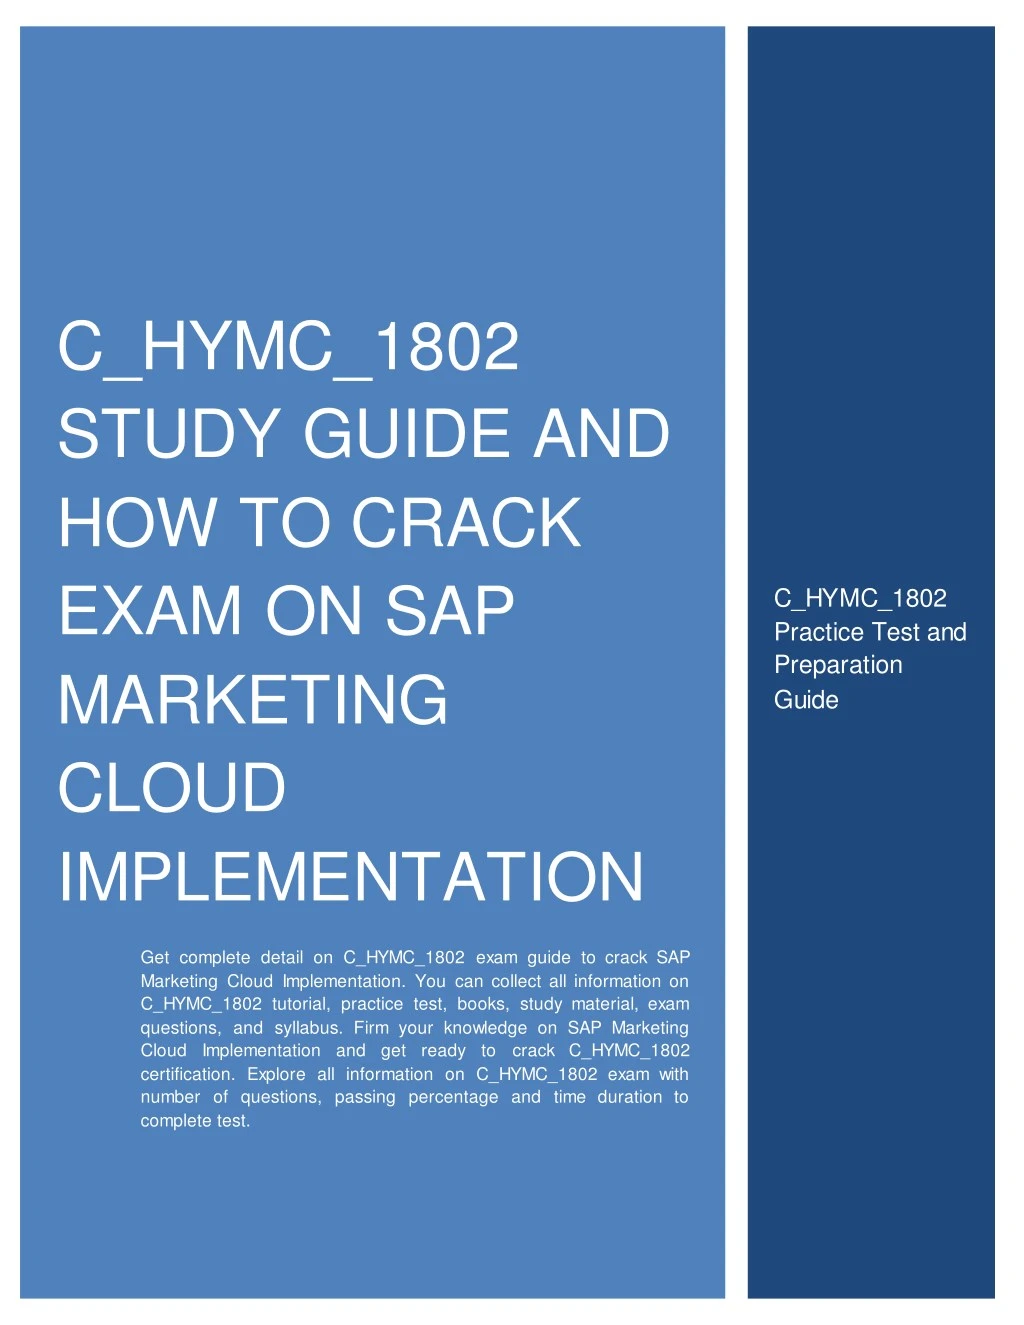 c hymc 1802 study guide and how to crack exam